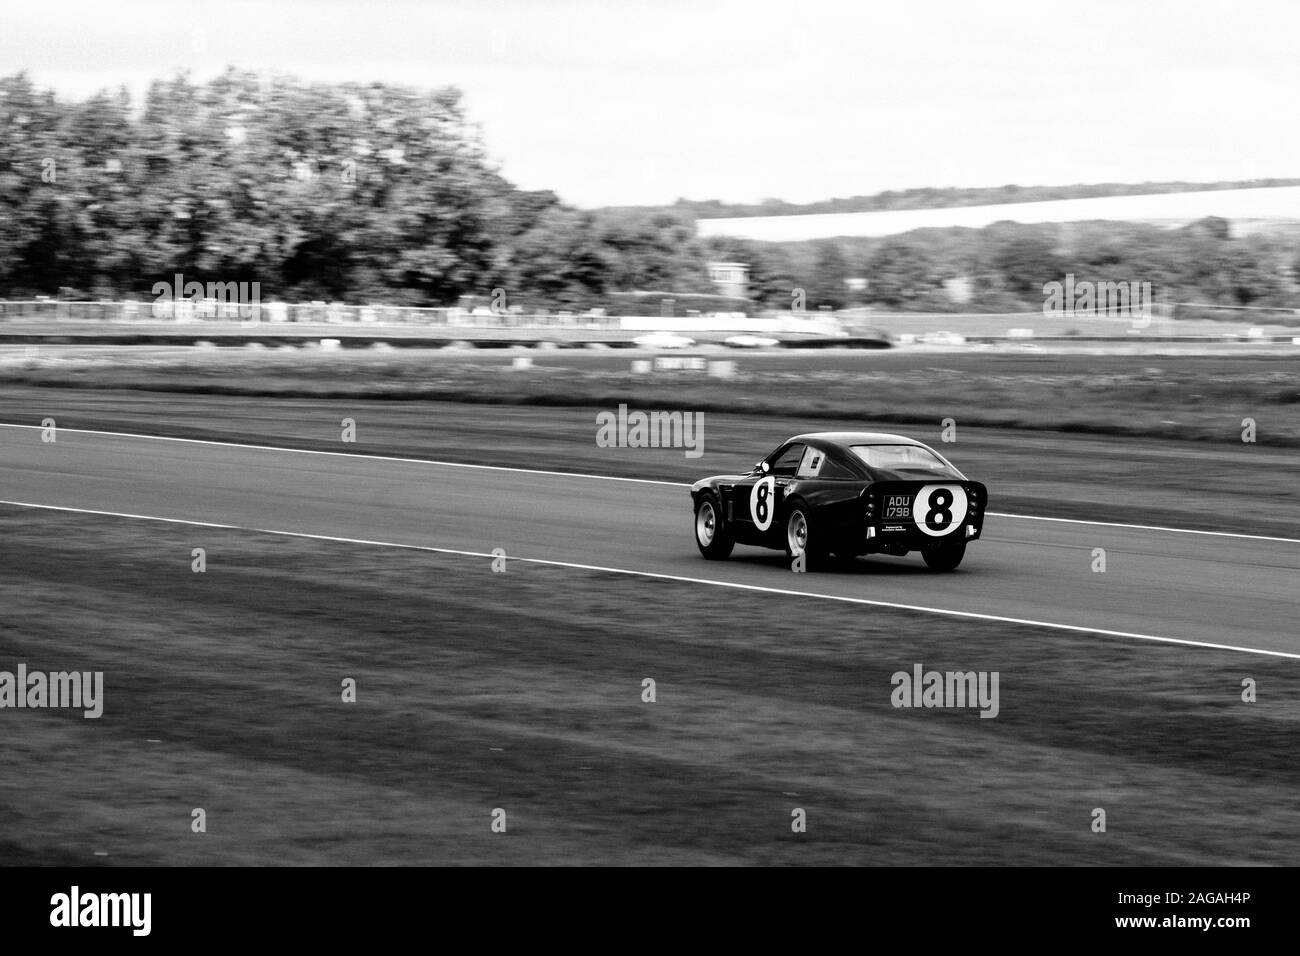 GOODWOOD, UNITED KINGDOM - Sep 09, 2017: A high angle shot of a beautiful black sports car riding in Goodwood city of the UK Stock Photo